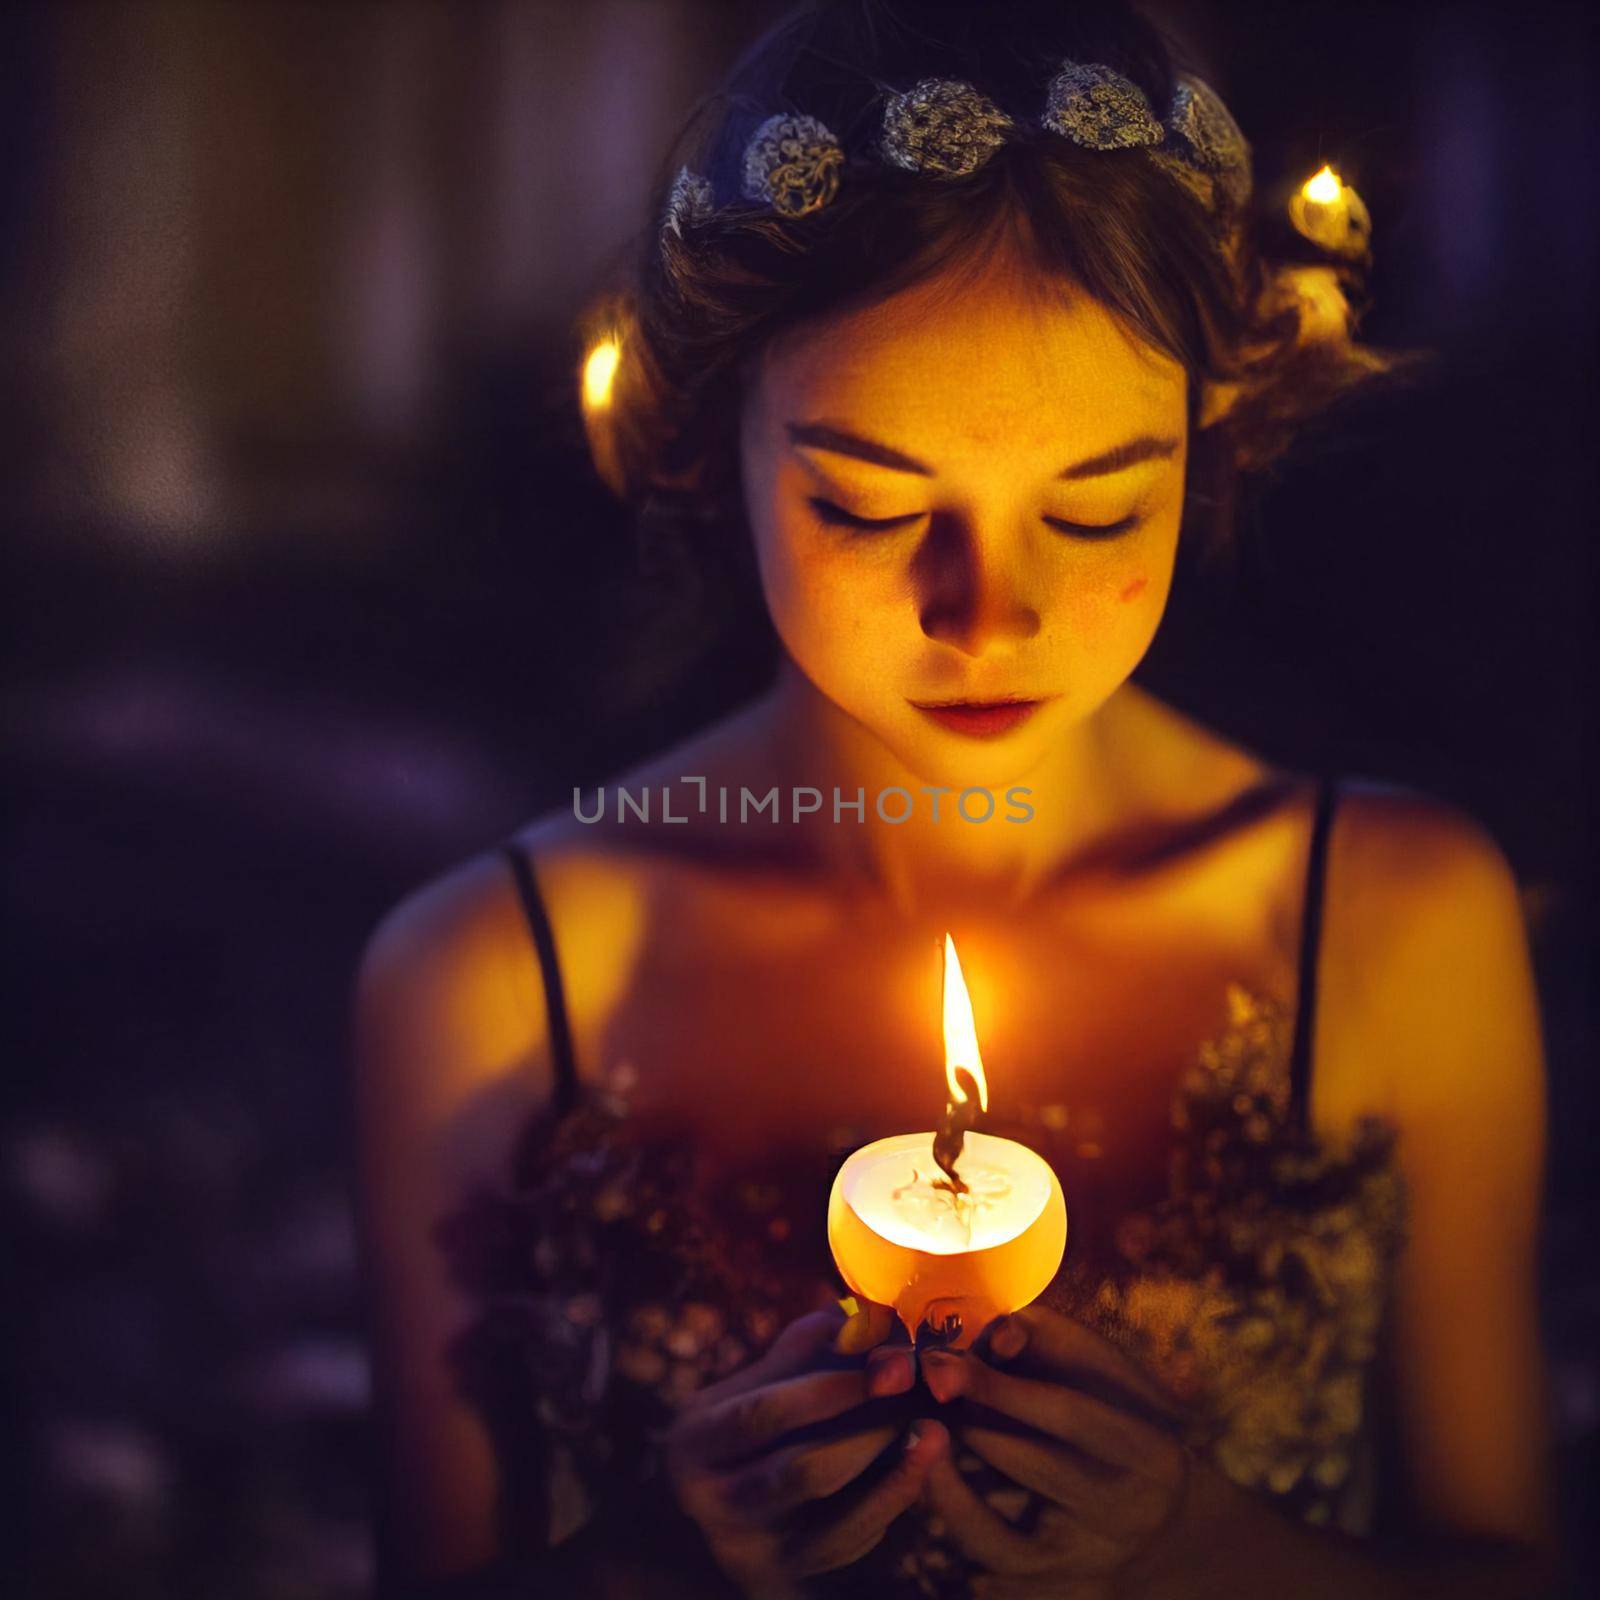 A girl who holds a candle on a gloomy background by NeuroSky